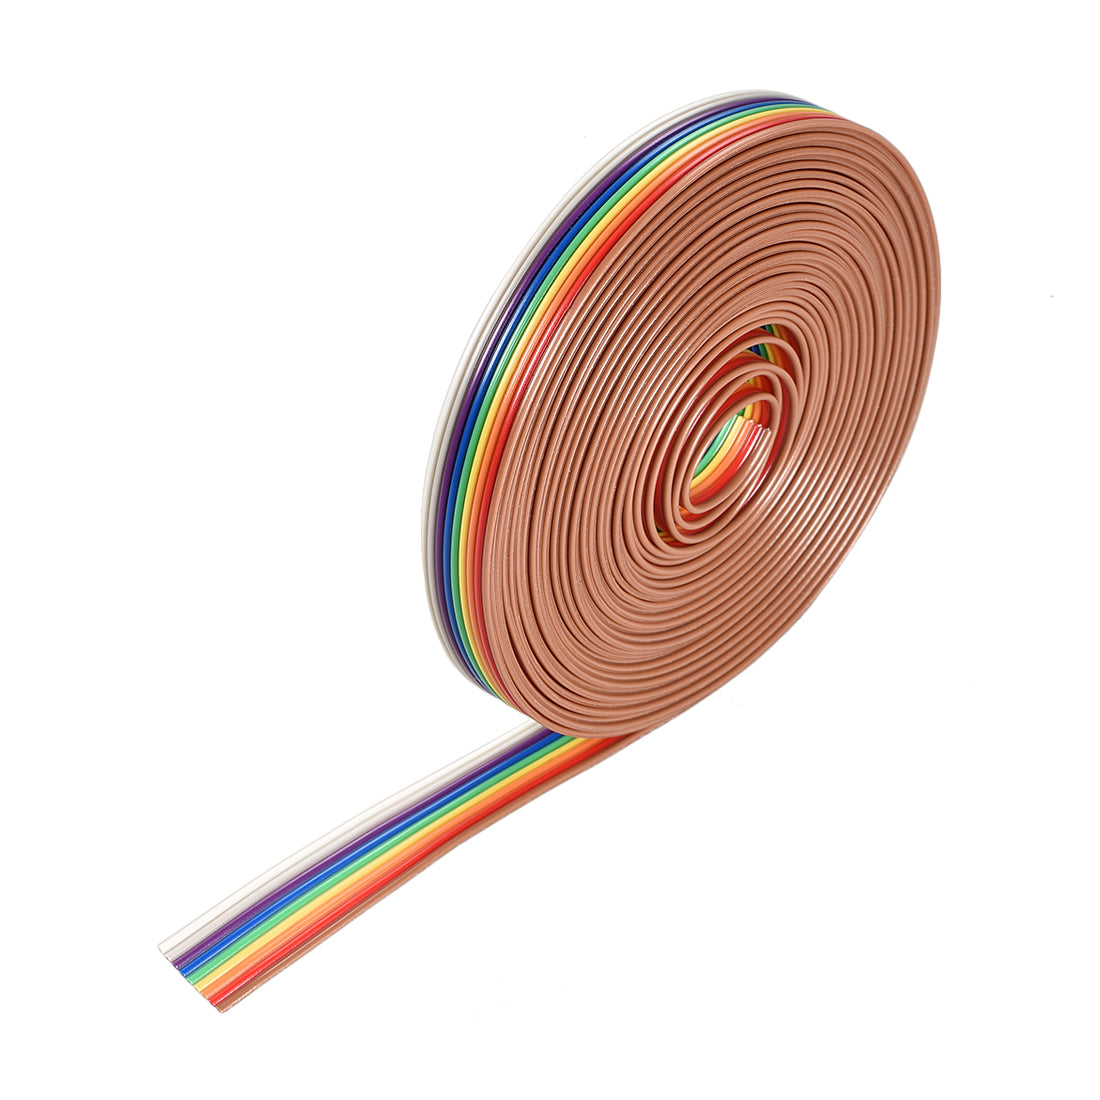 uxcell Uxcell IDC Rainbow Wire Flat Ribbon Cable 9P 1.27mm Pitch 5meter/16.4ft Length